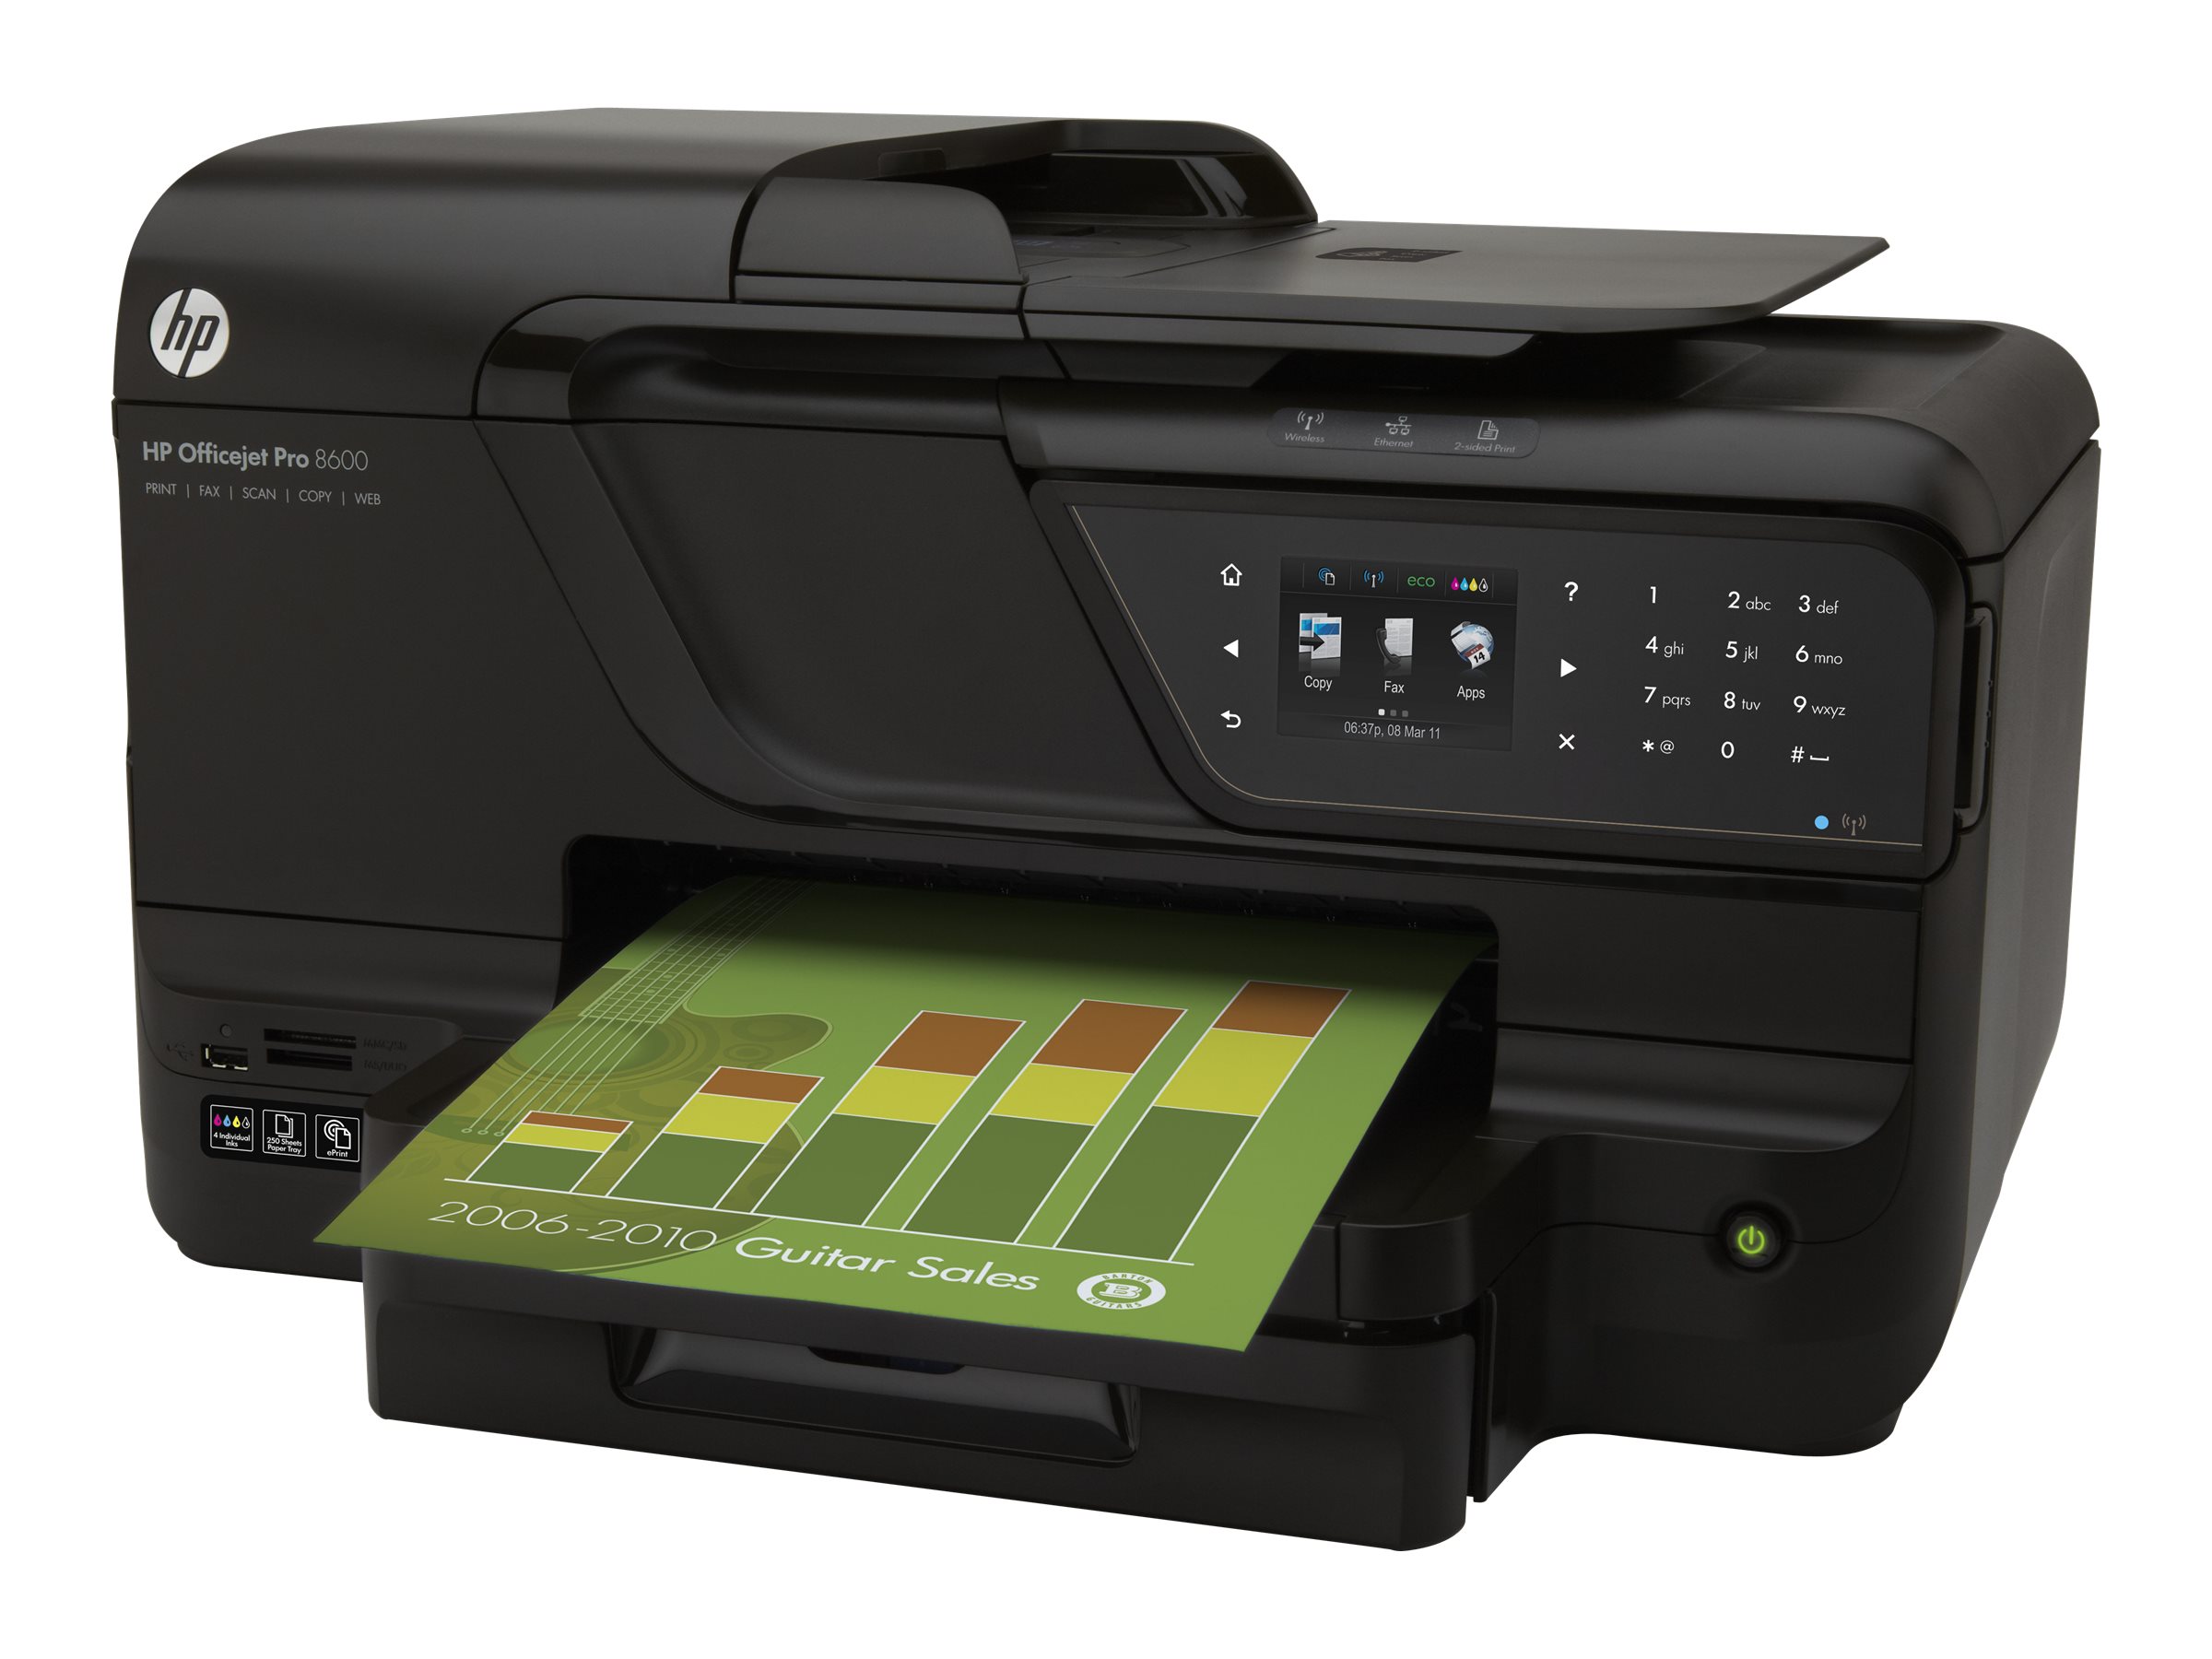 HP Officejet Pro 8600 e-All-in-One N911a .com